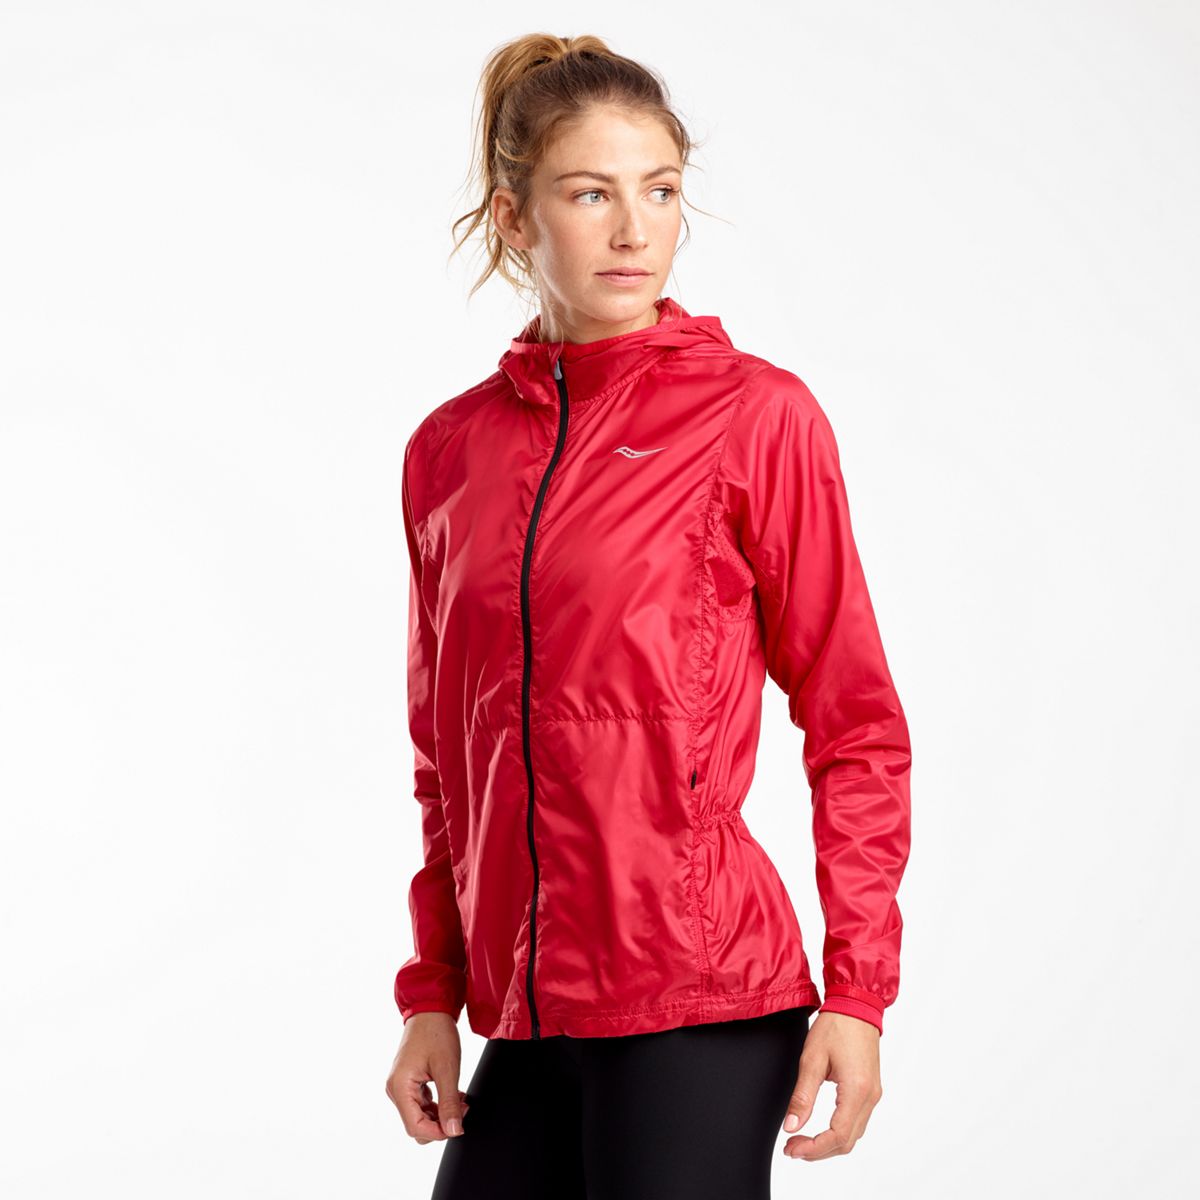 Running Jackets, Vests \u0026 Outerwear for Women | Saucony